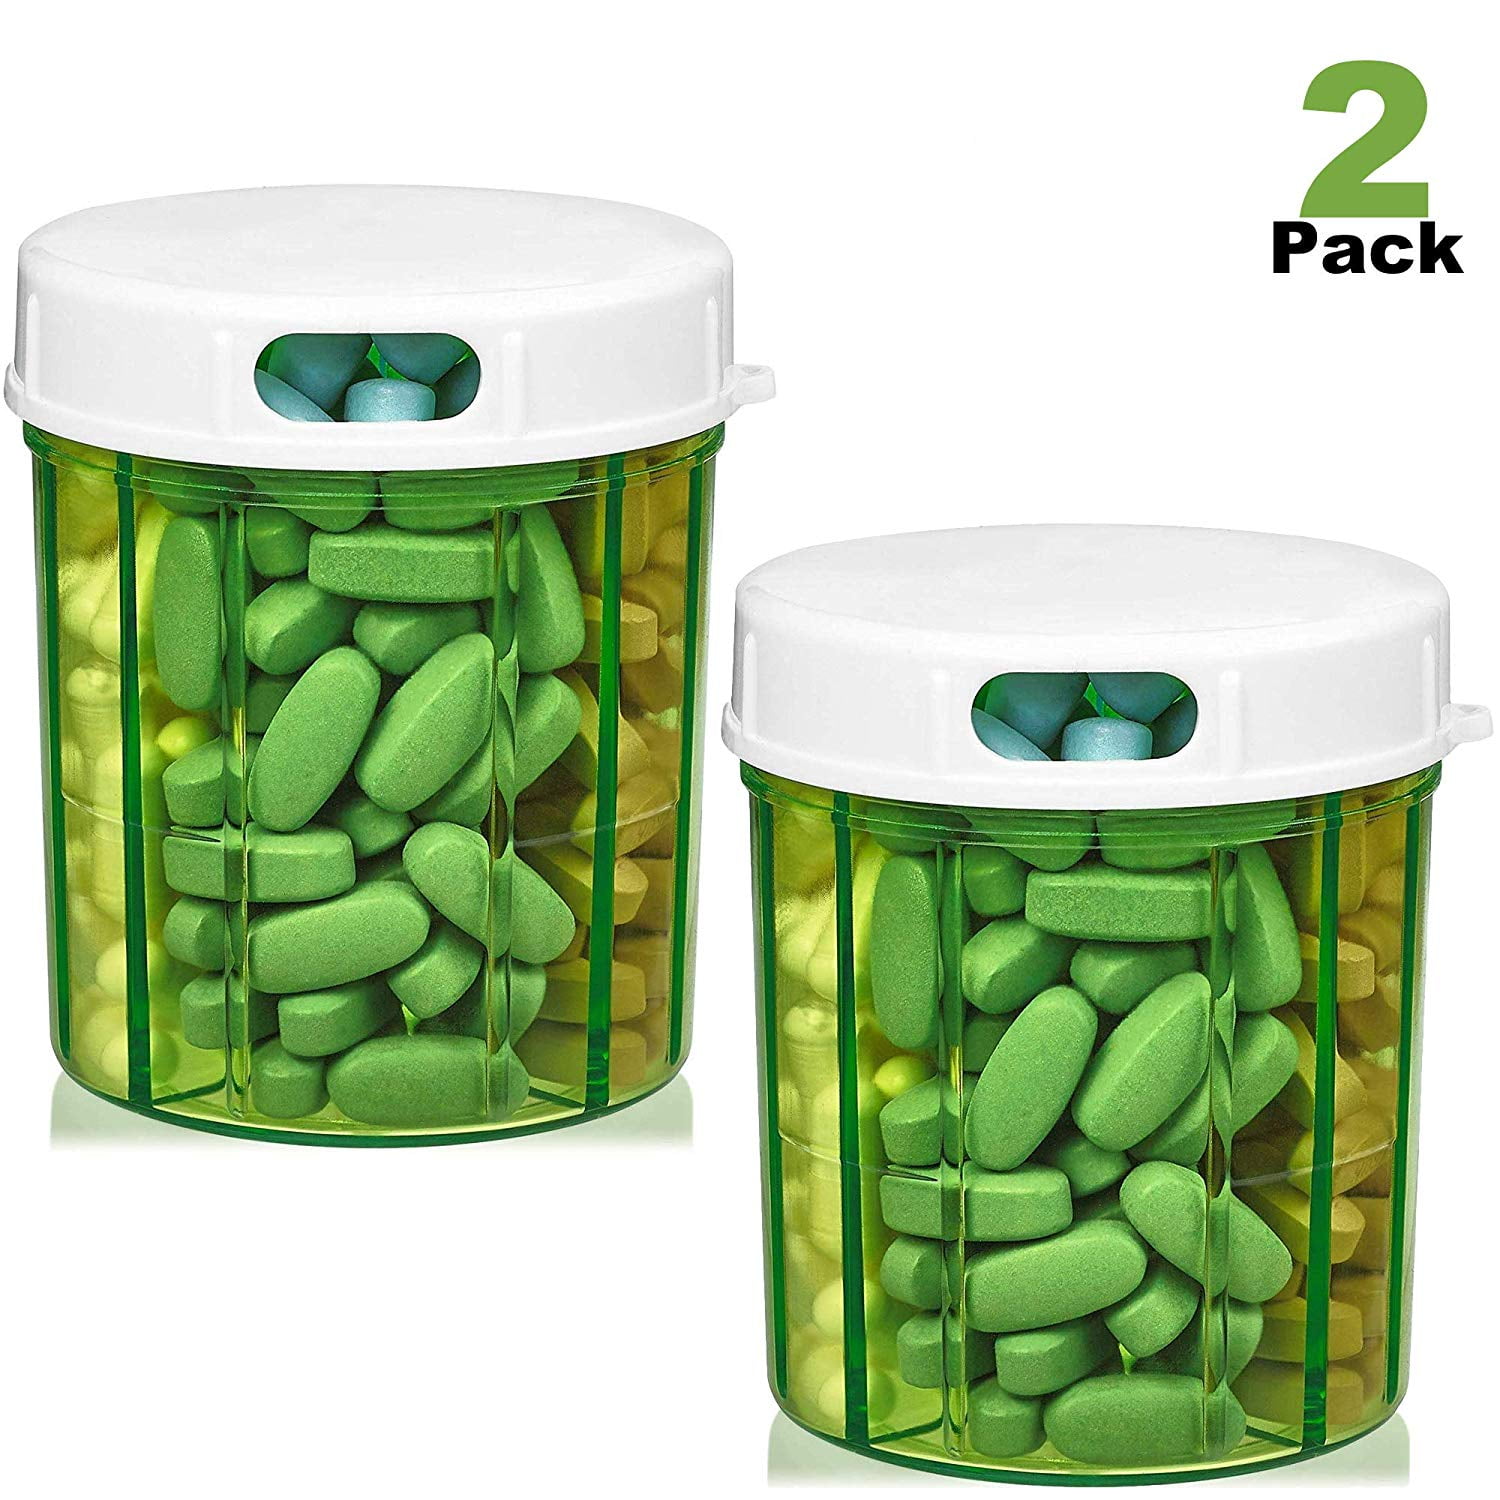 Medca Monthly Pill Bottle Organizer Caddy Pk 2 Medication Aids by MEDca, Size: One Size